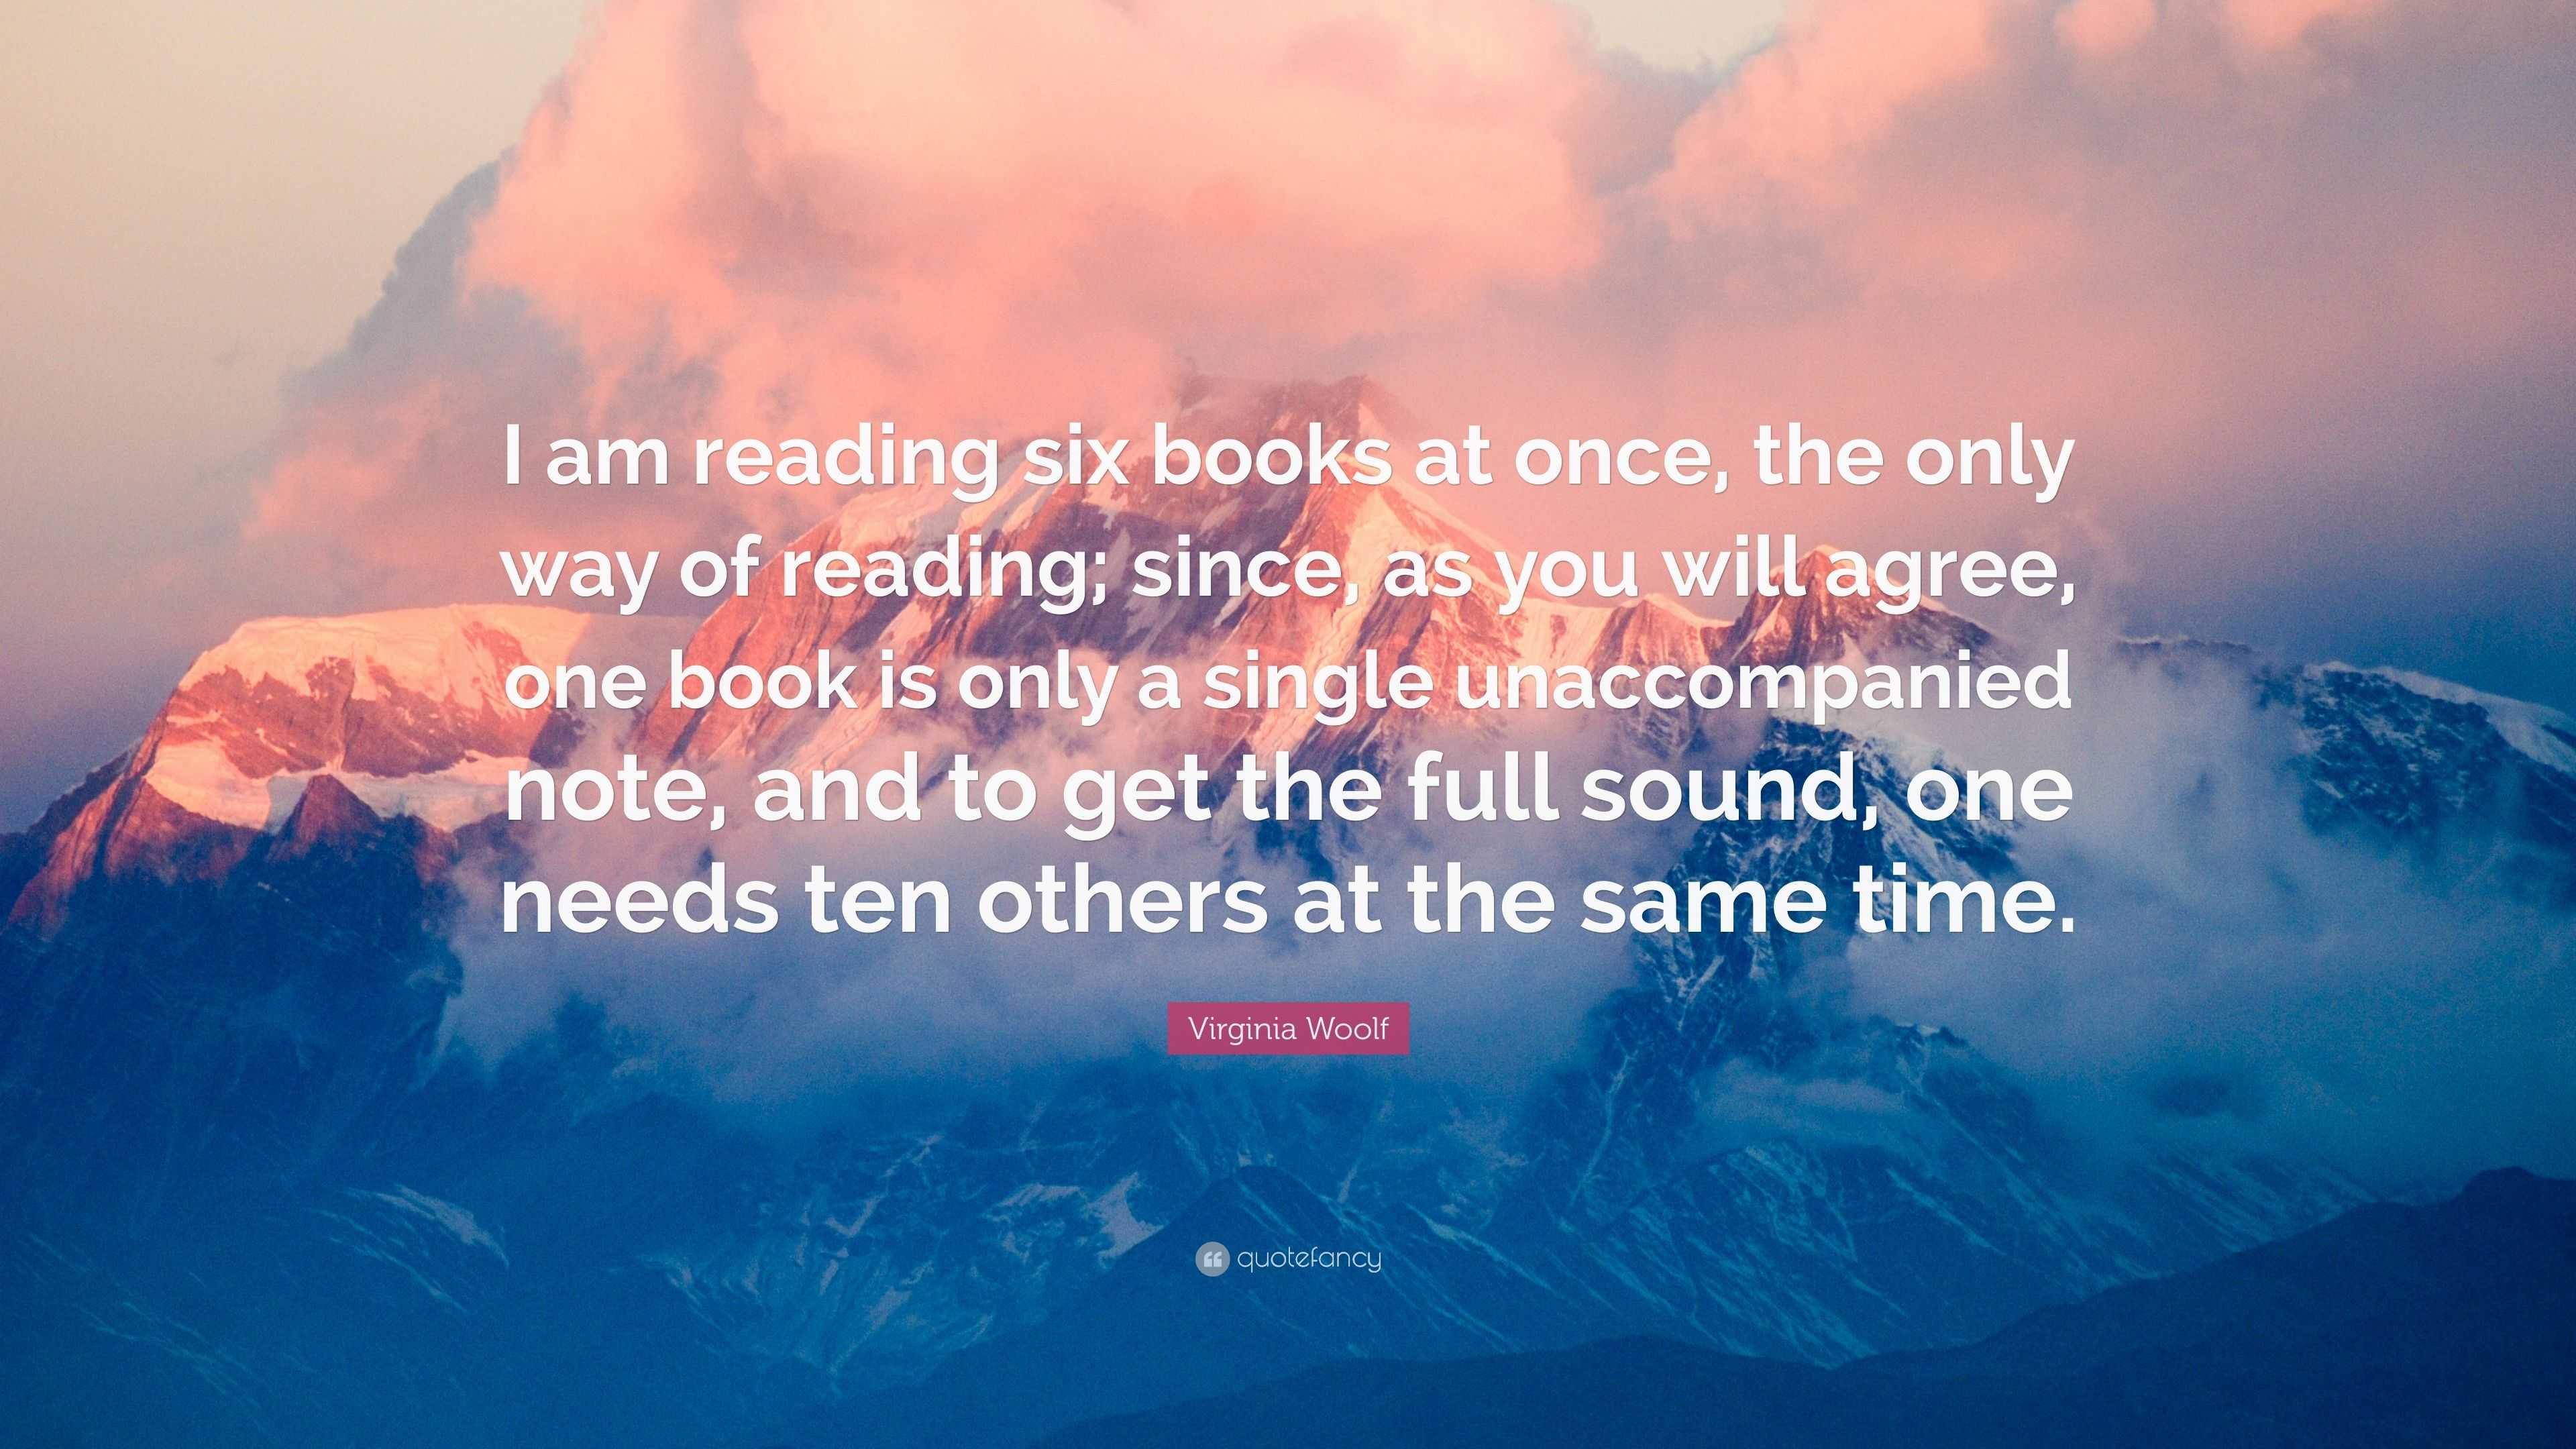 Virginia Woolf Quote: “I am reading six books at once, the only way of ...